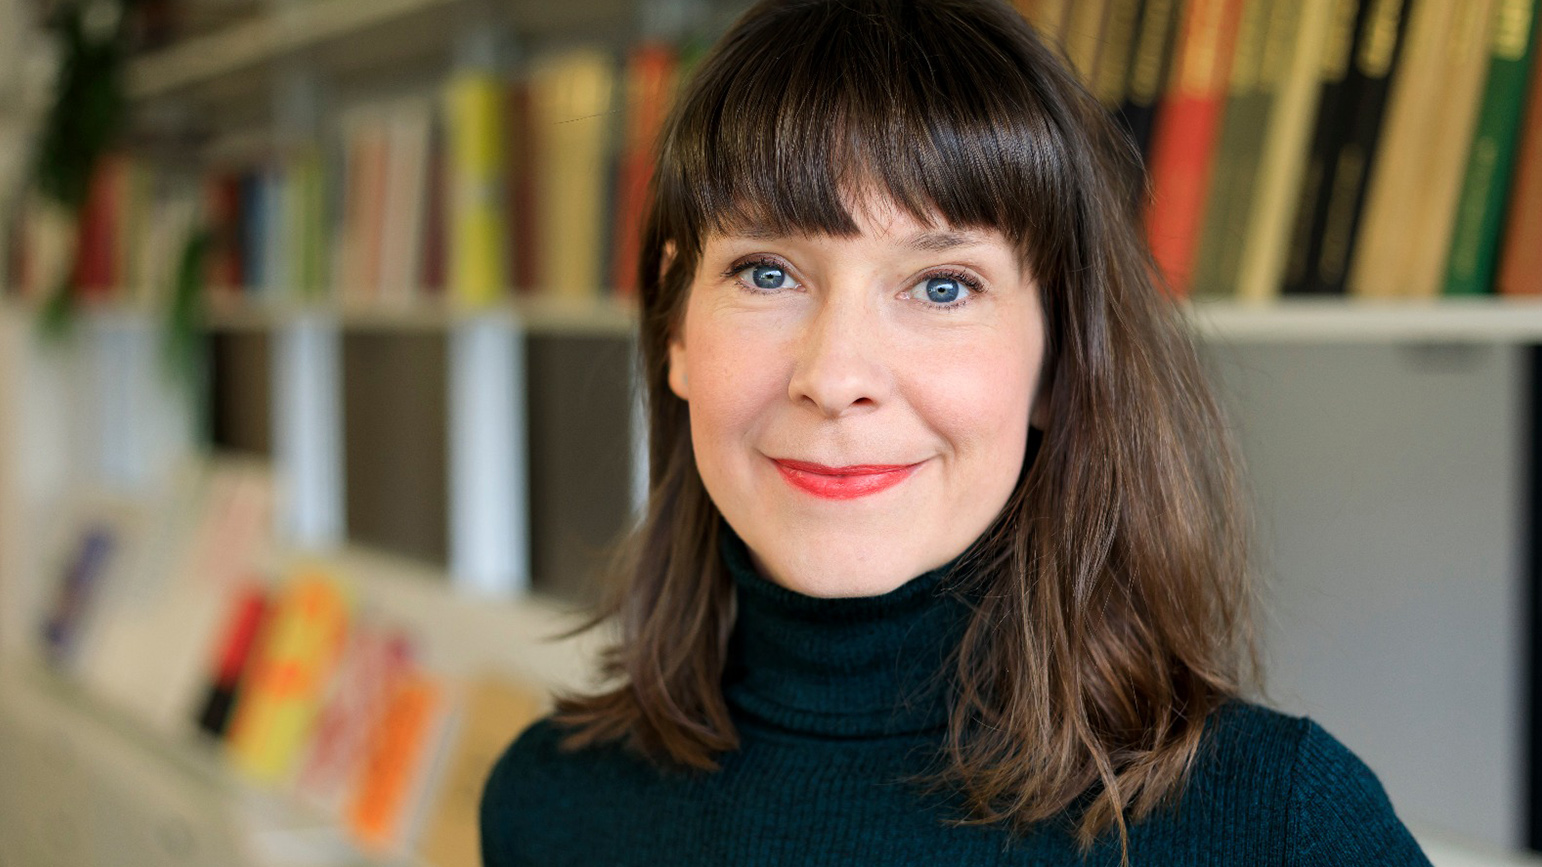 Headshot of a woman with a bookshelf in the background